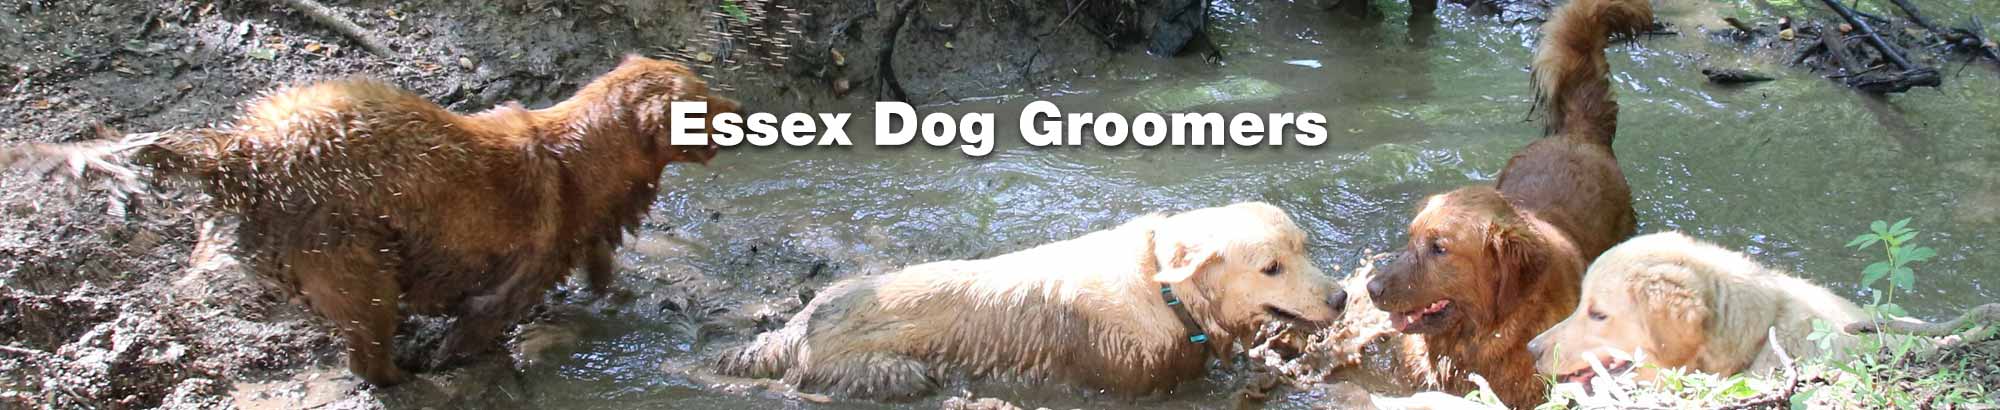 Essex Dogs - Find a professional dog groomer in Essex